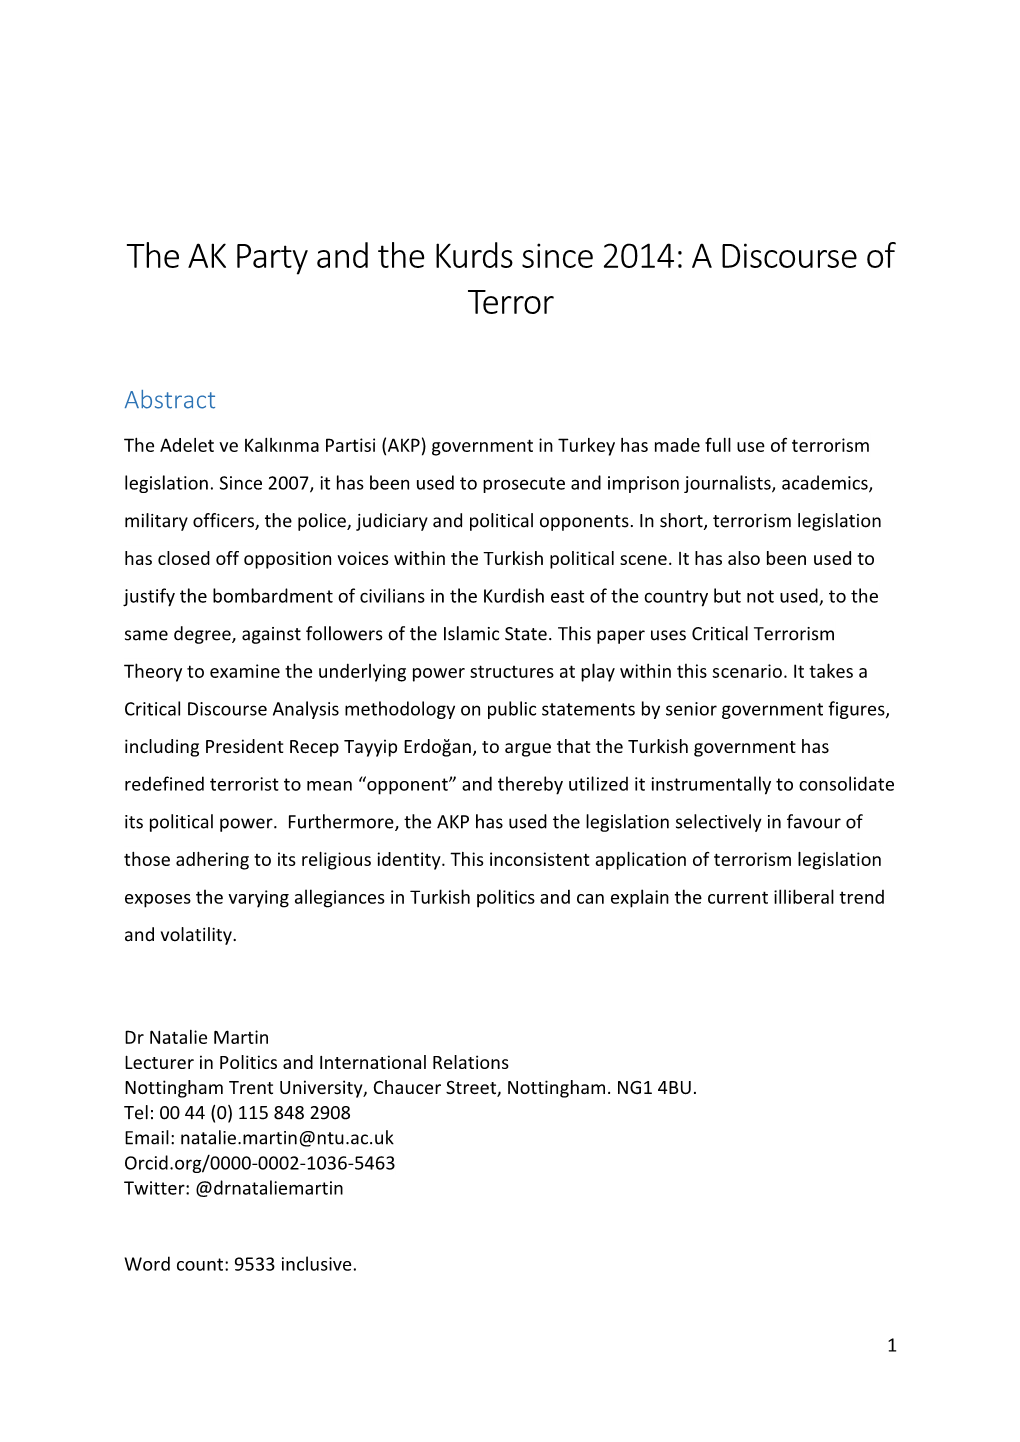 The AK Party and the Kurds Since 2014: a Discourse of Terror